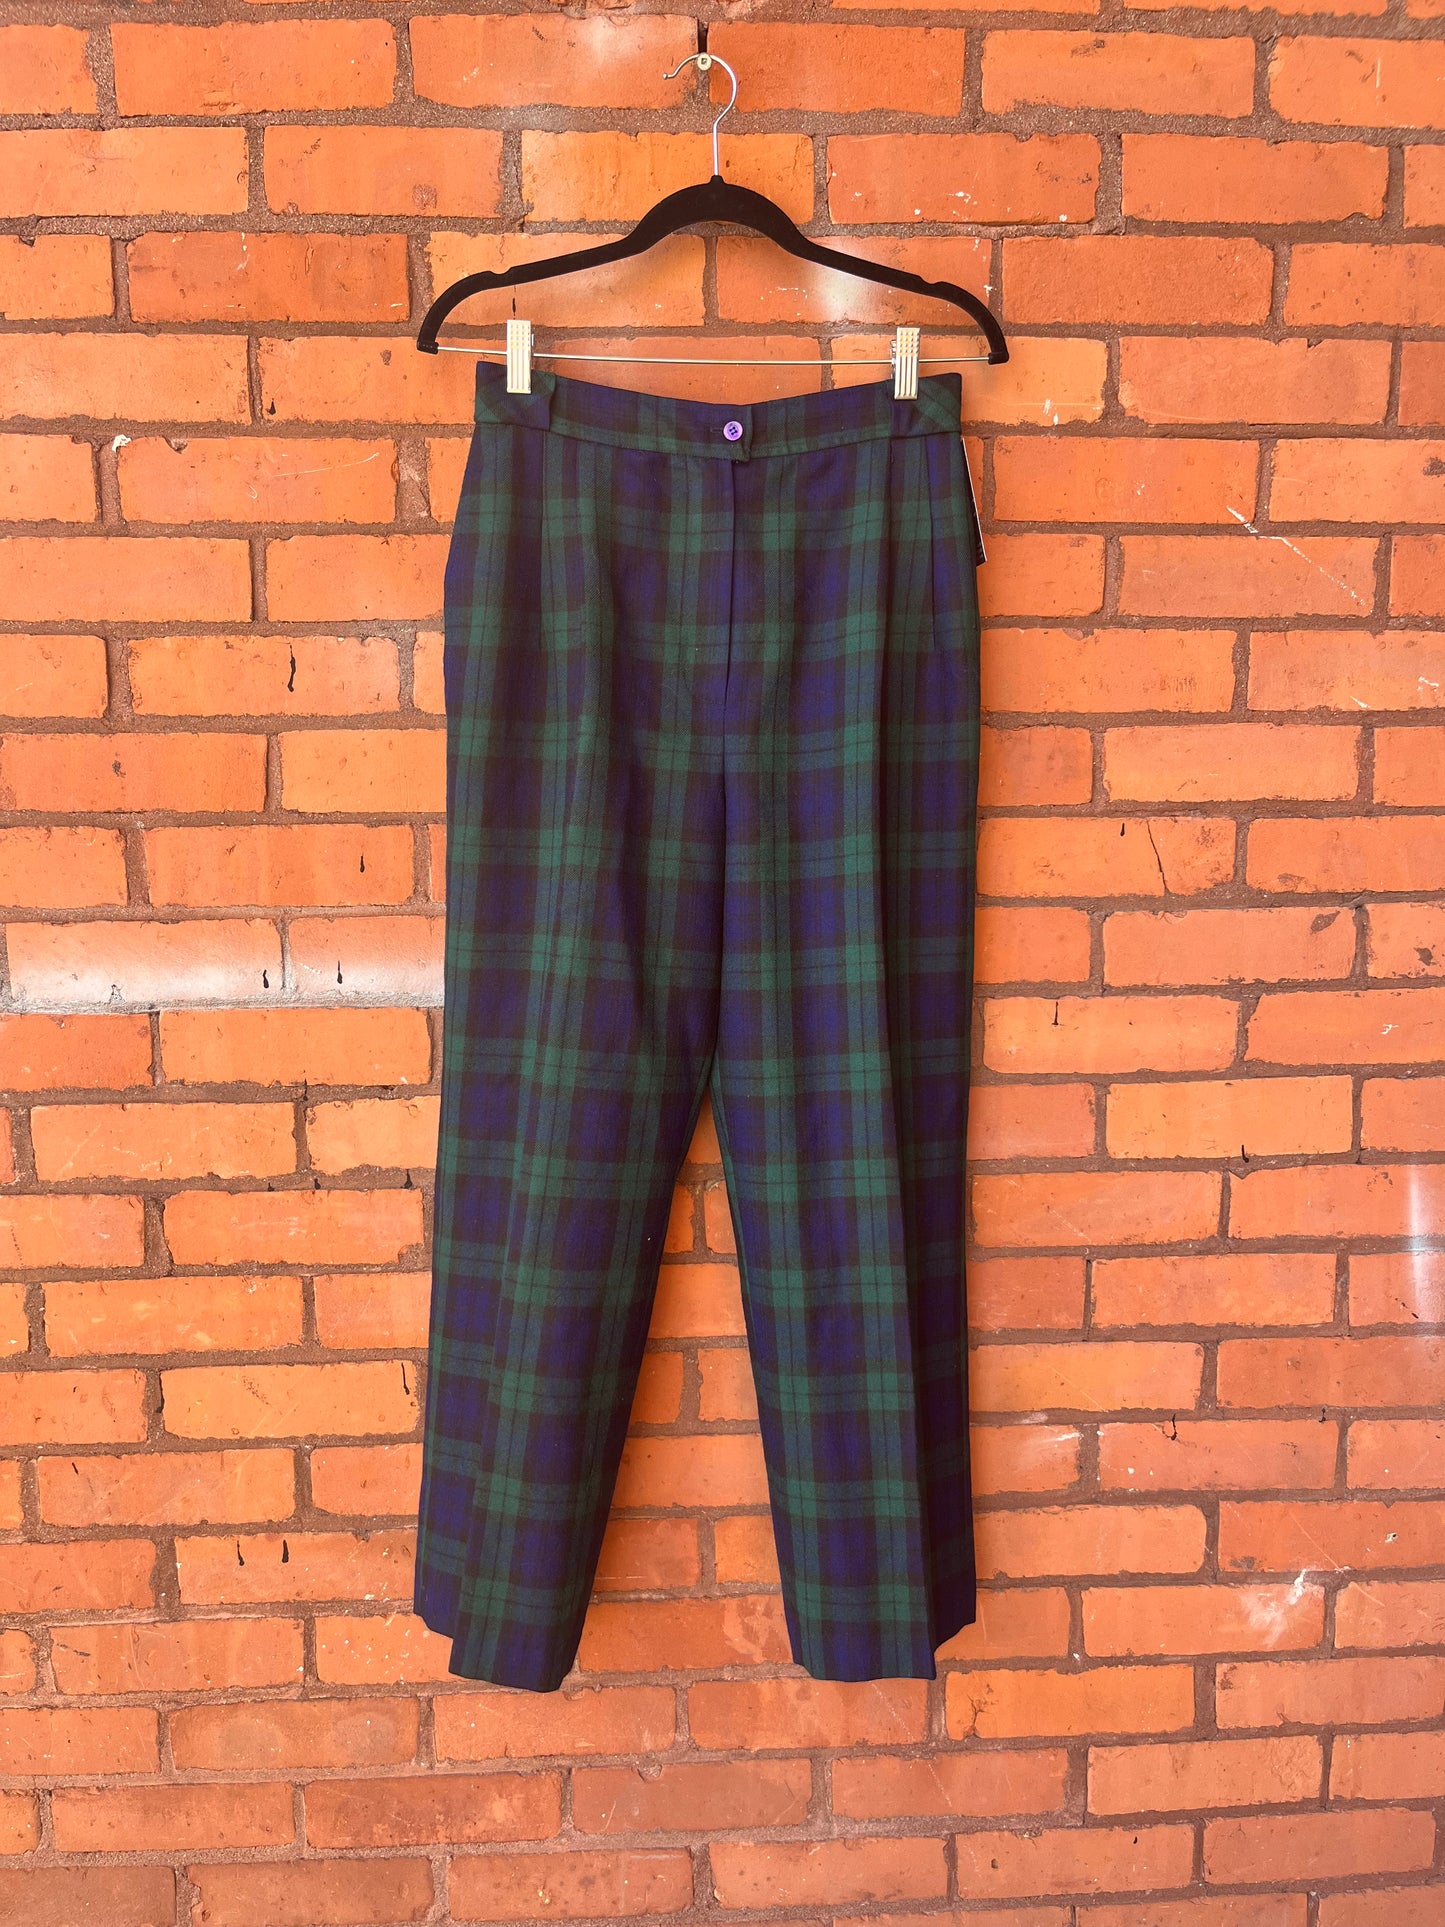 90’s Vintage Green & Navy Plaid Wool Trousers / 29 Waist